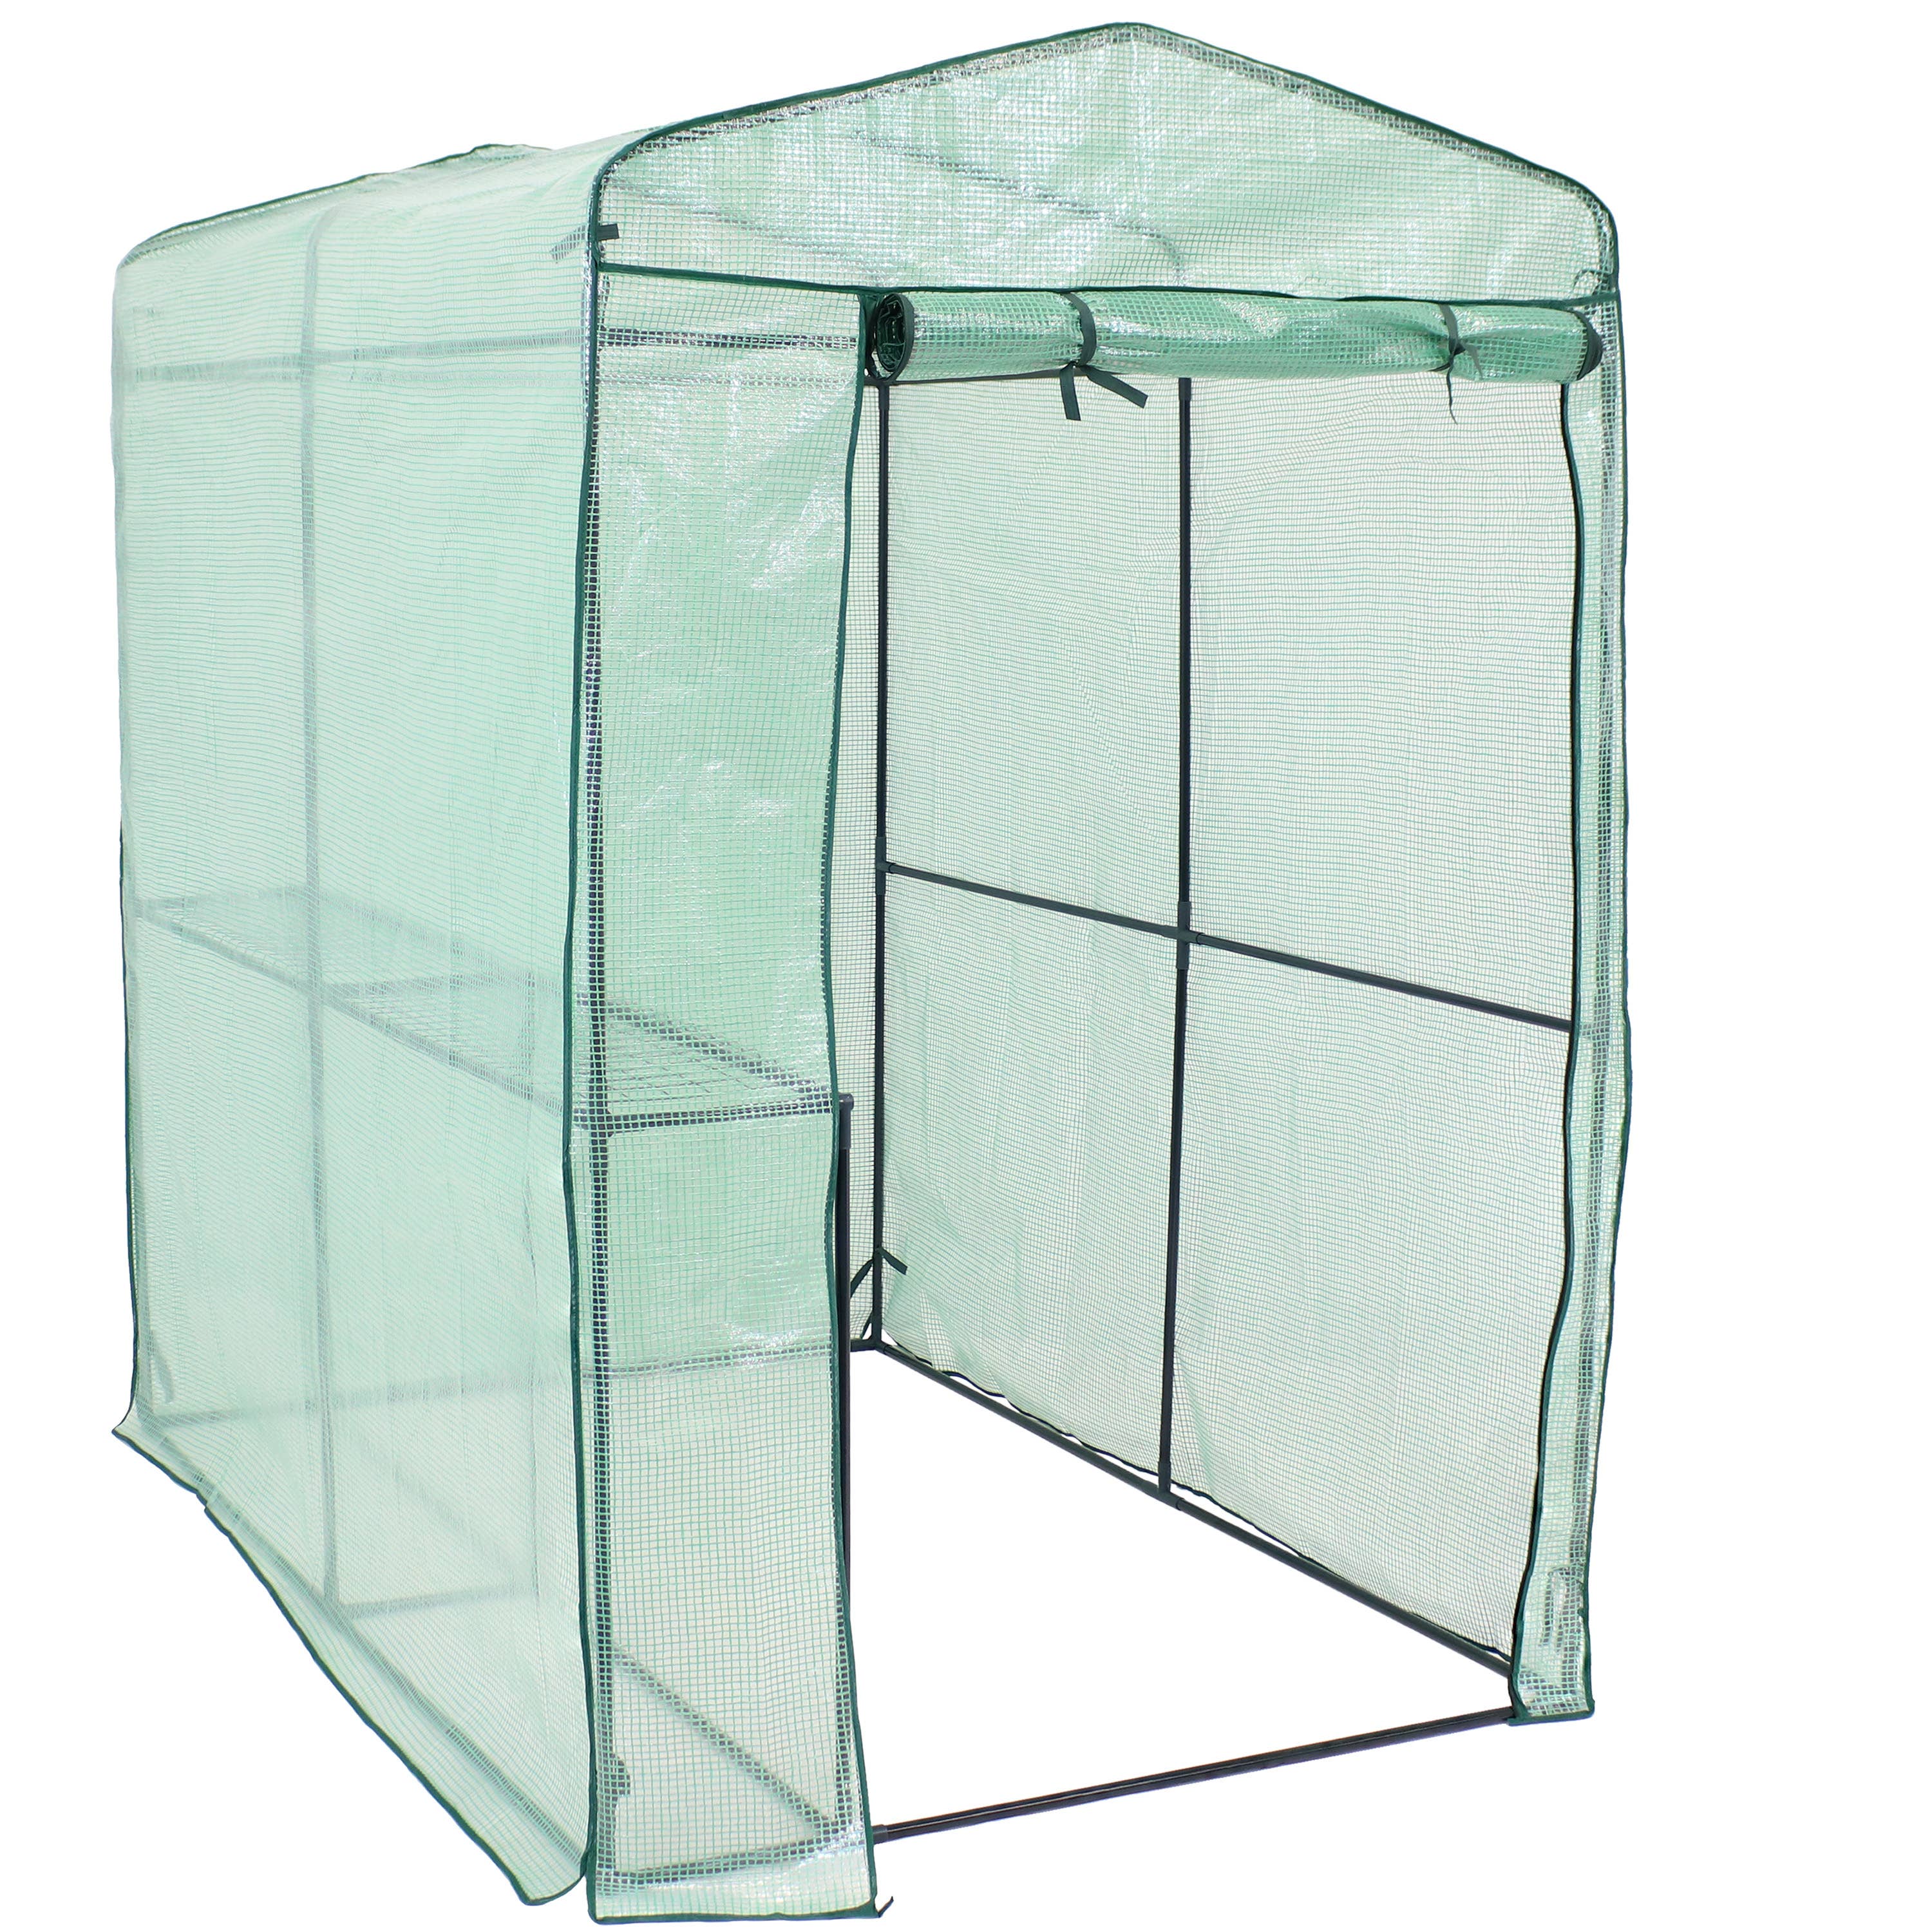 Deluxe Walk-In Greenhouse with 1 Shelf for Outdoors - Green